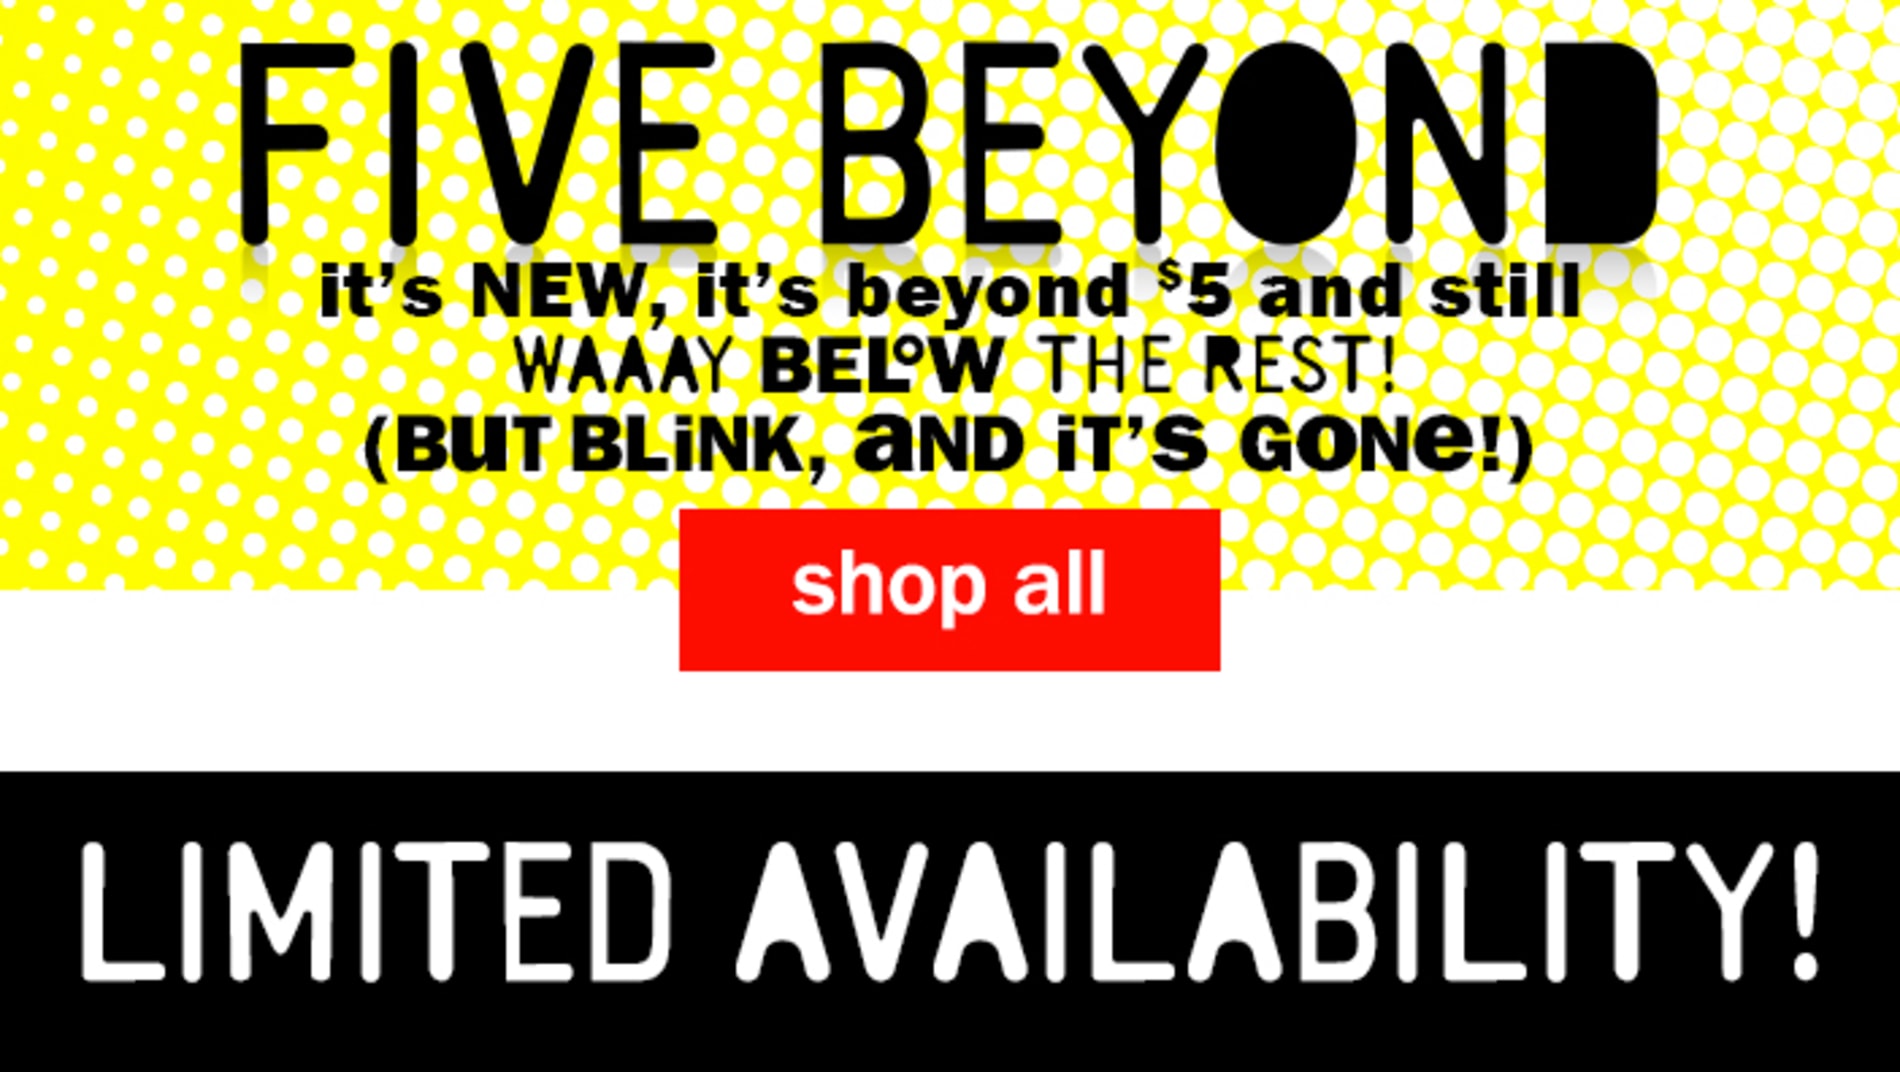 Five Beyond. It's new, it's beyond $5 and still WAAAY below the rest! (but blink, and it's gone!) Shop All